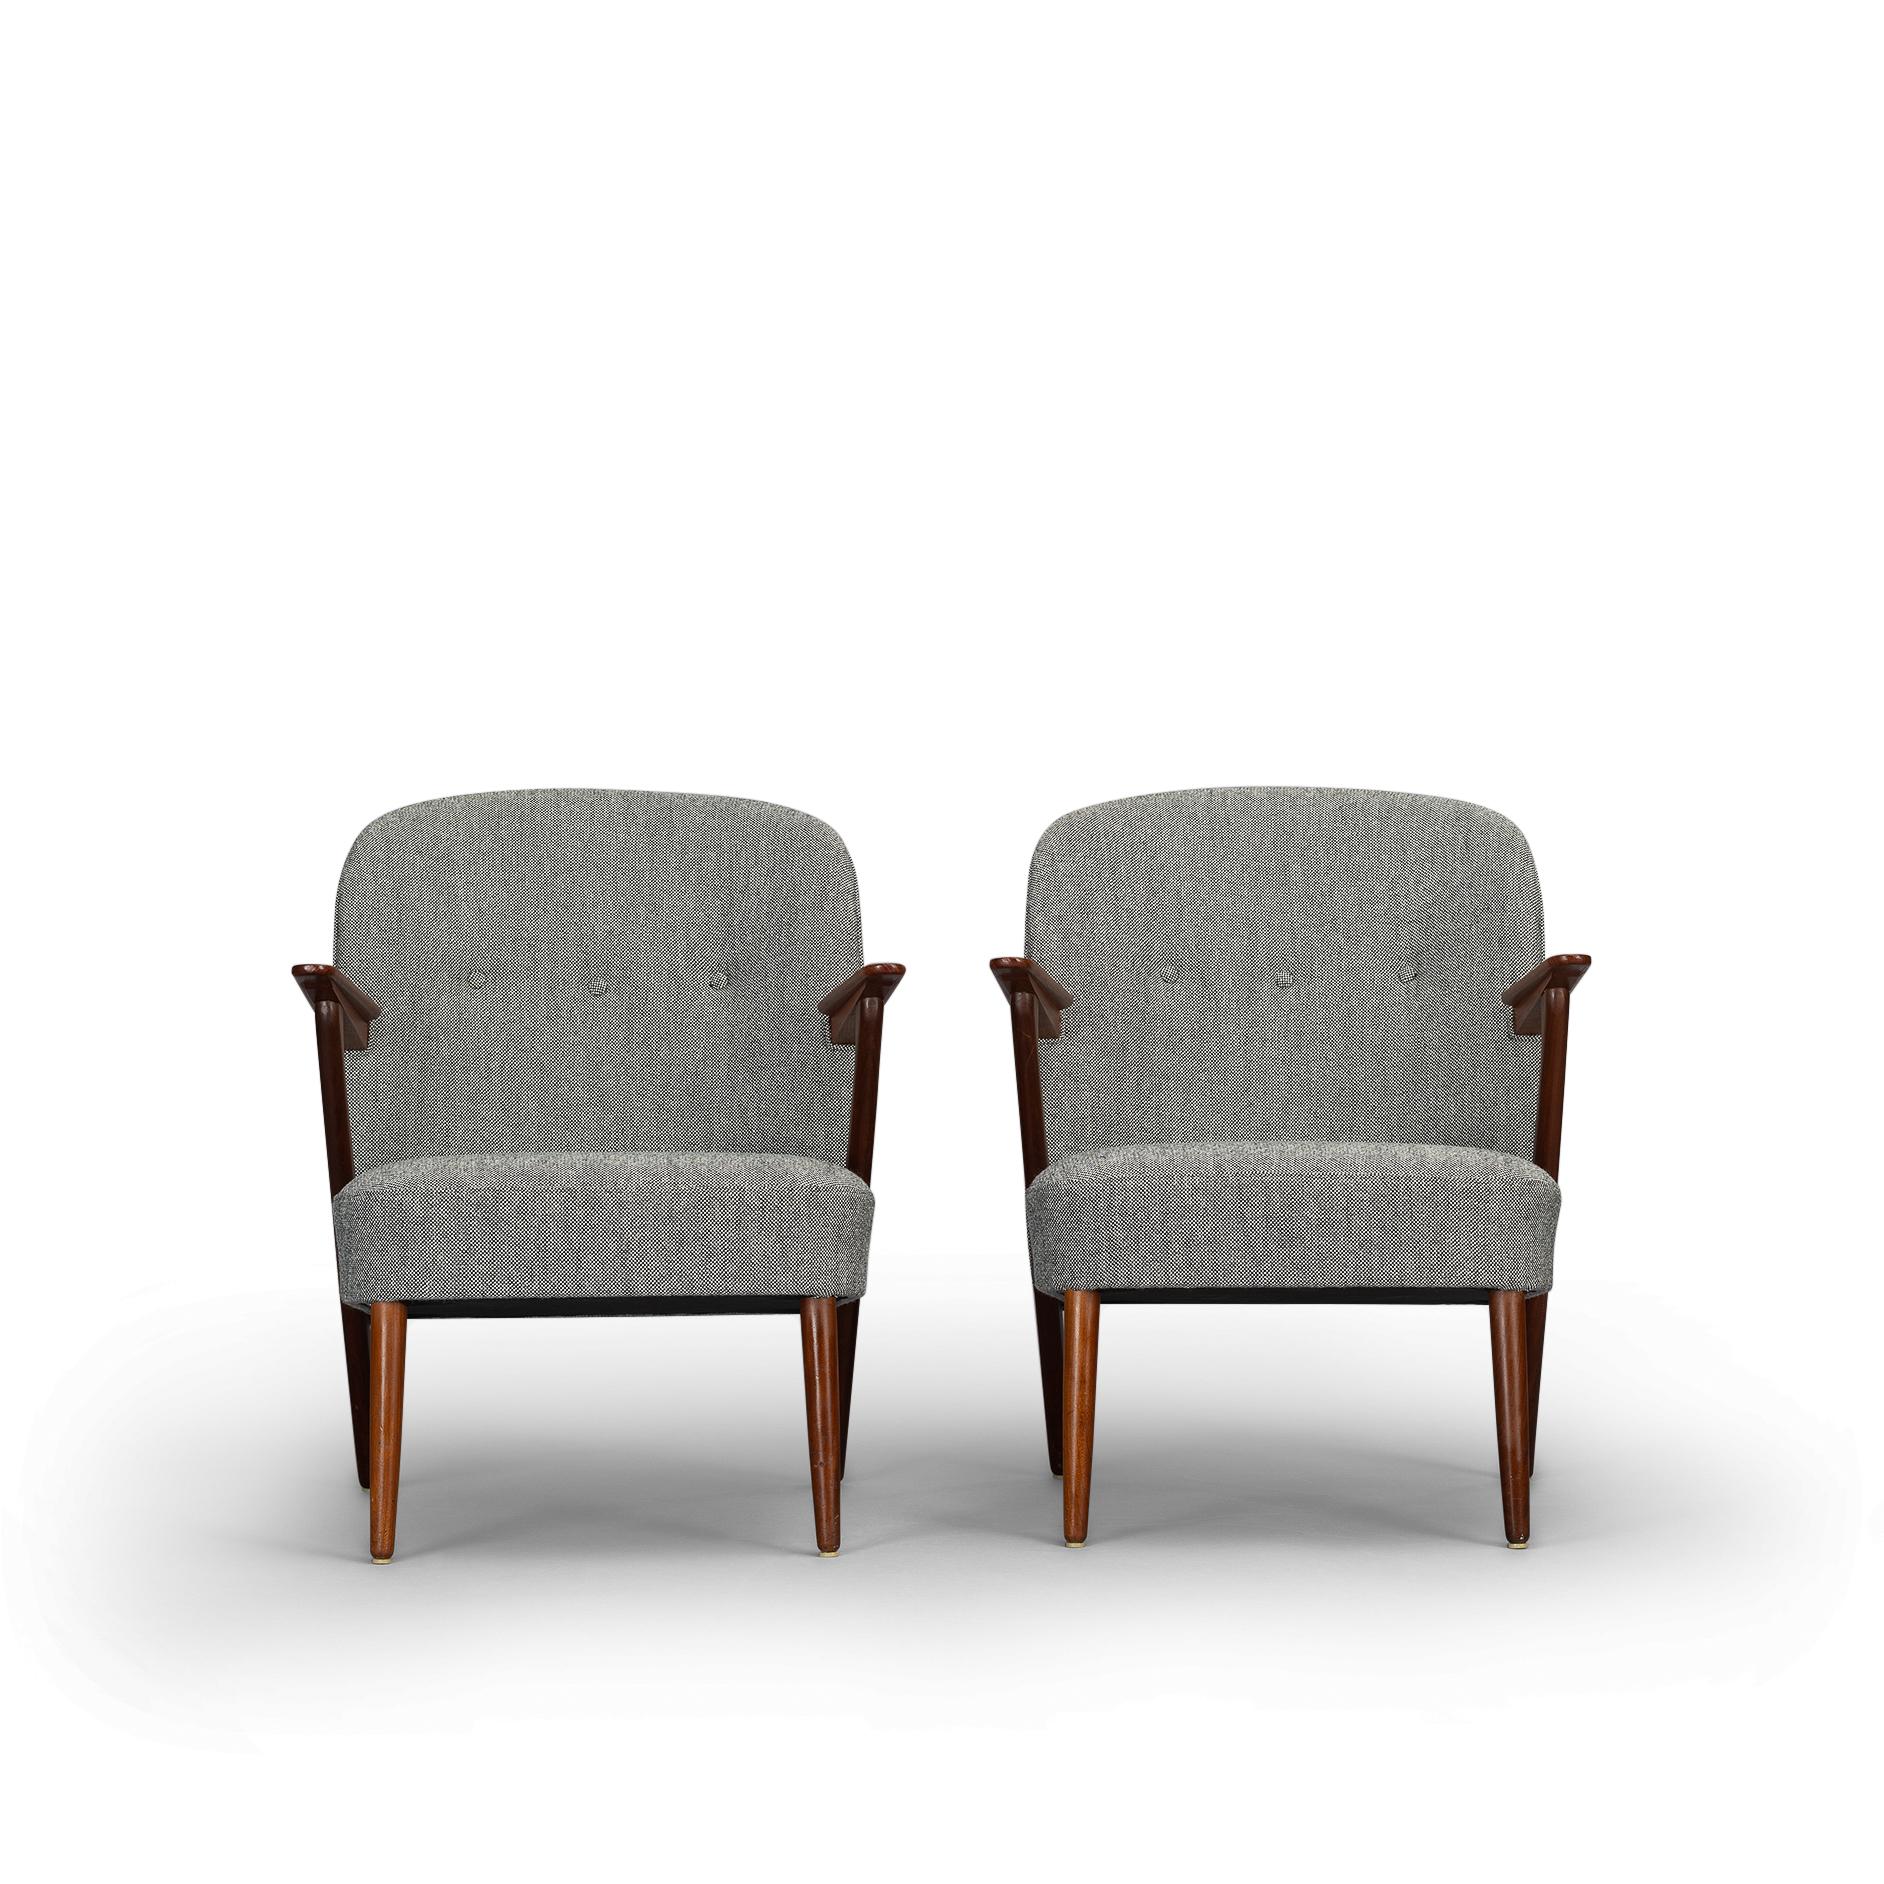 Stunning pair of fully reupholstered Danish lounge chairs designed by Kurt Olsen from the mid-1960s. Armrests and legs are made from solid teak and to reupholster a Kvadrat Hallingdal 65 wool has been selected. This Kvadrat fabric was designed by